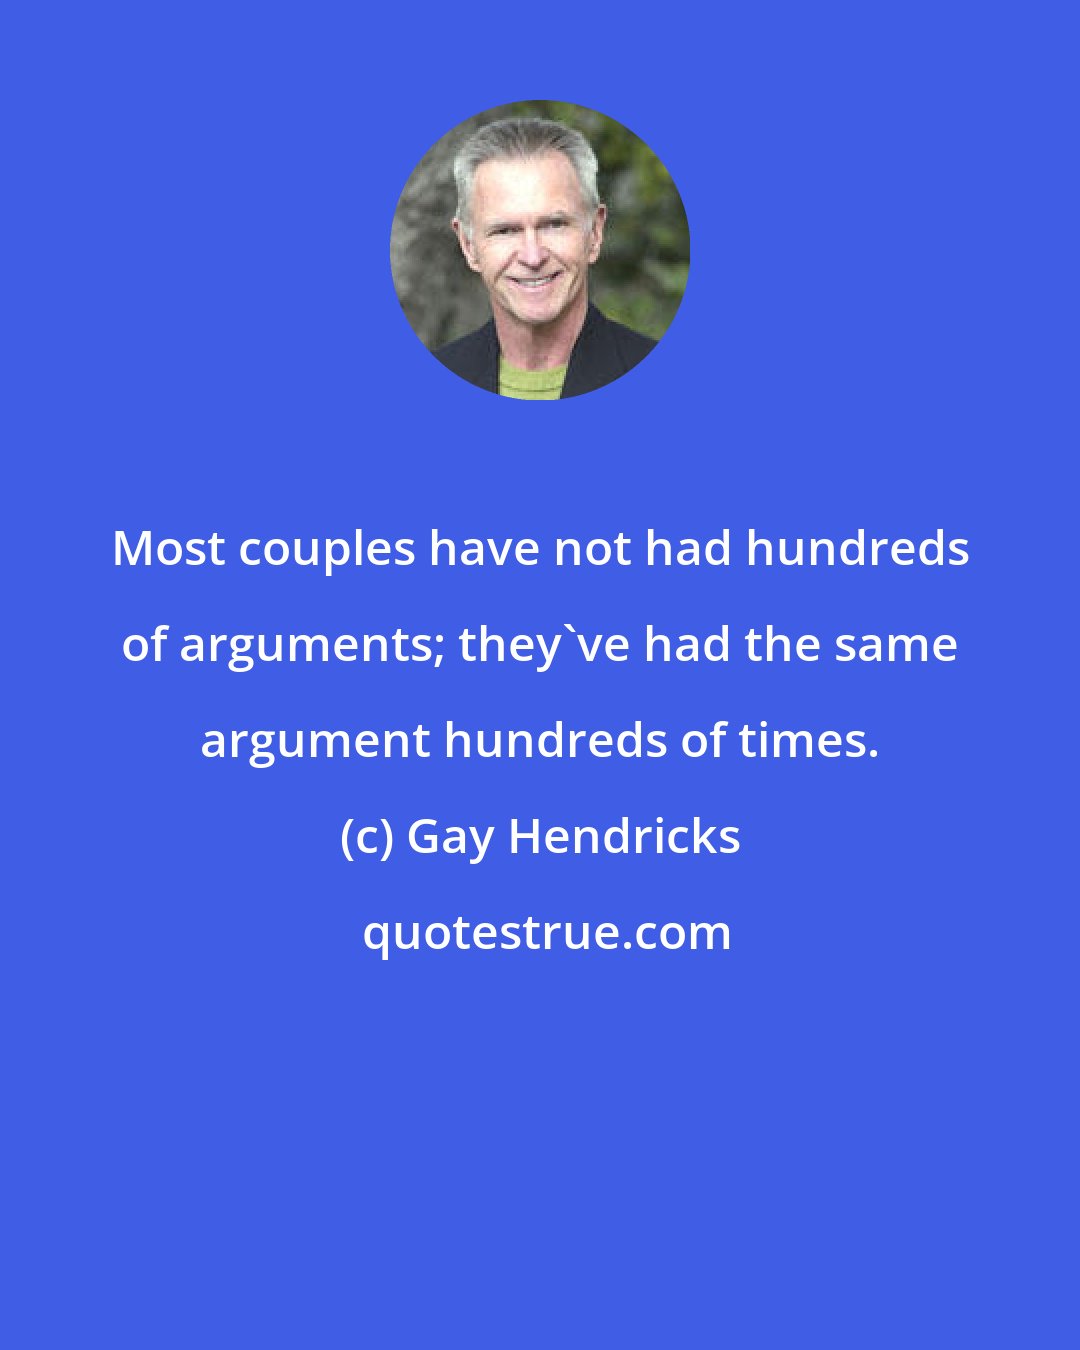 Gay Hendricks: Most couples have not had hundreds of arguments; they've had the same argument hundreds of times.